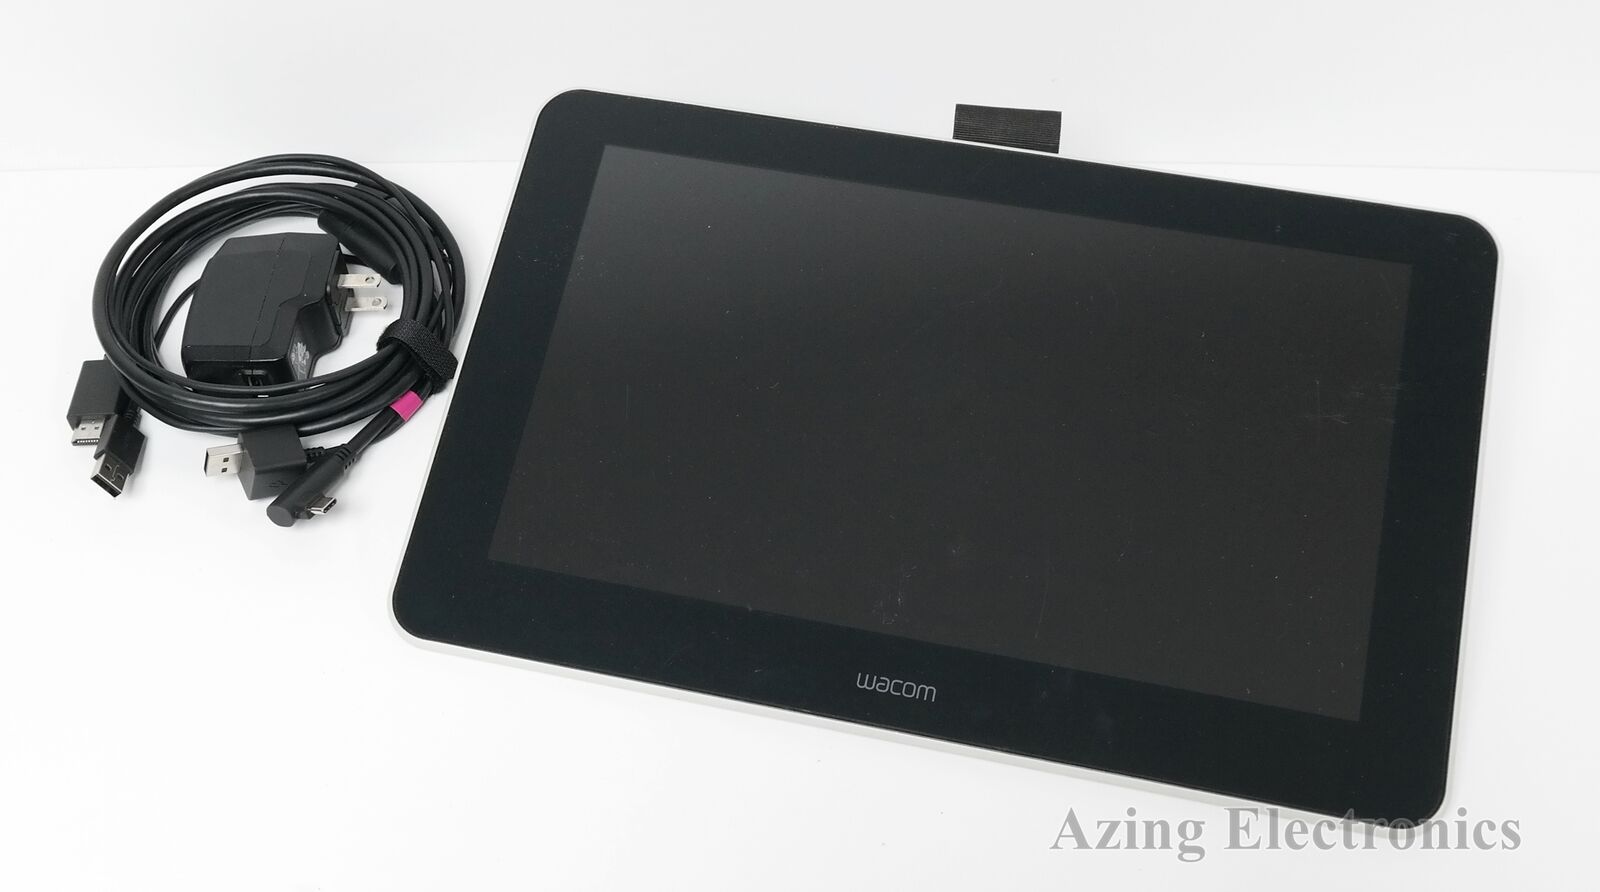 Wacom One DTC133W0A Digital Drawing Tablet with 13.3